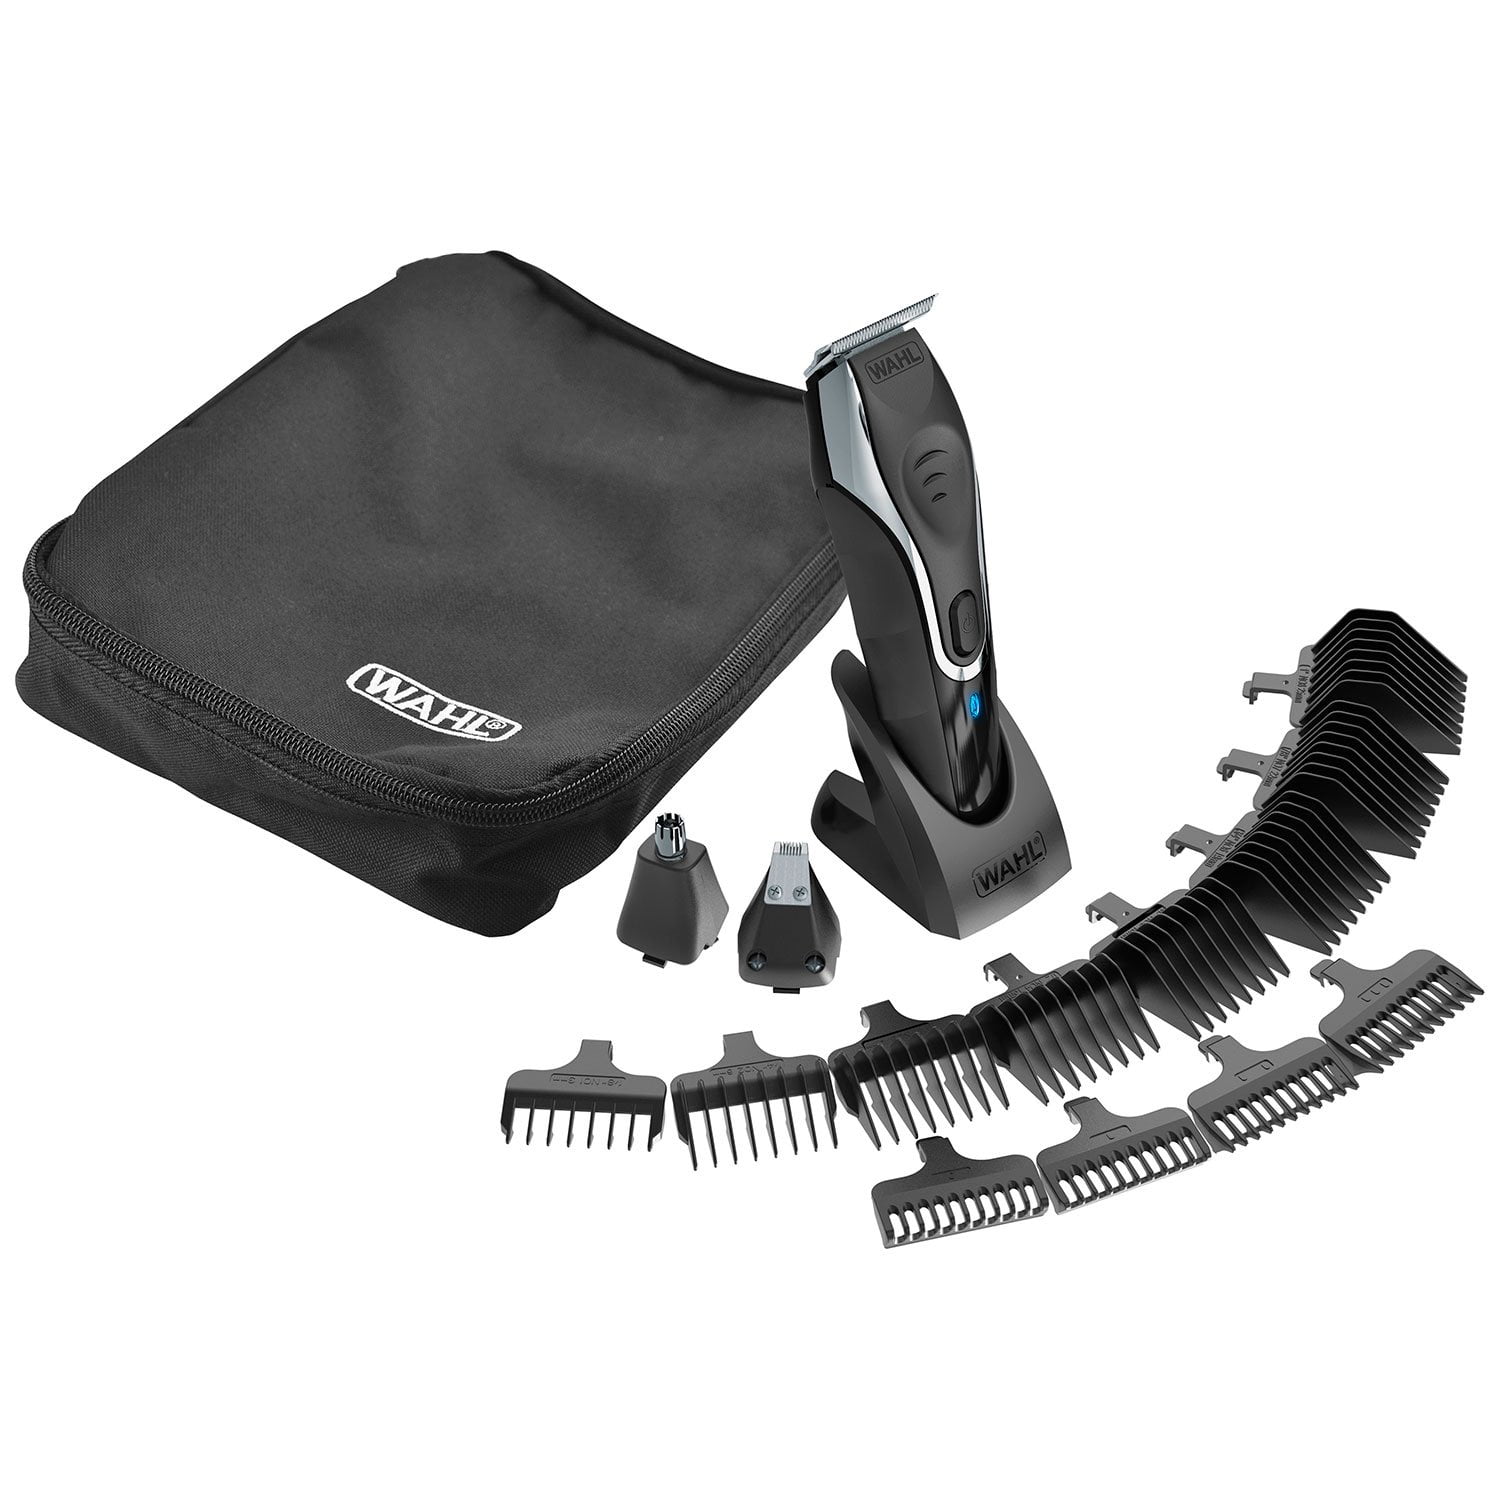 Wahl Trim & Shave Lithium Ion Wet/Dry Hair Trimmer